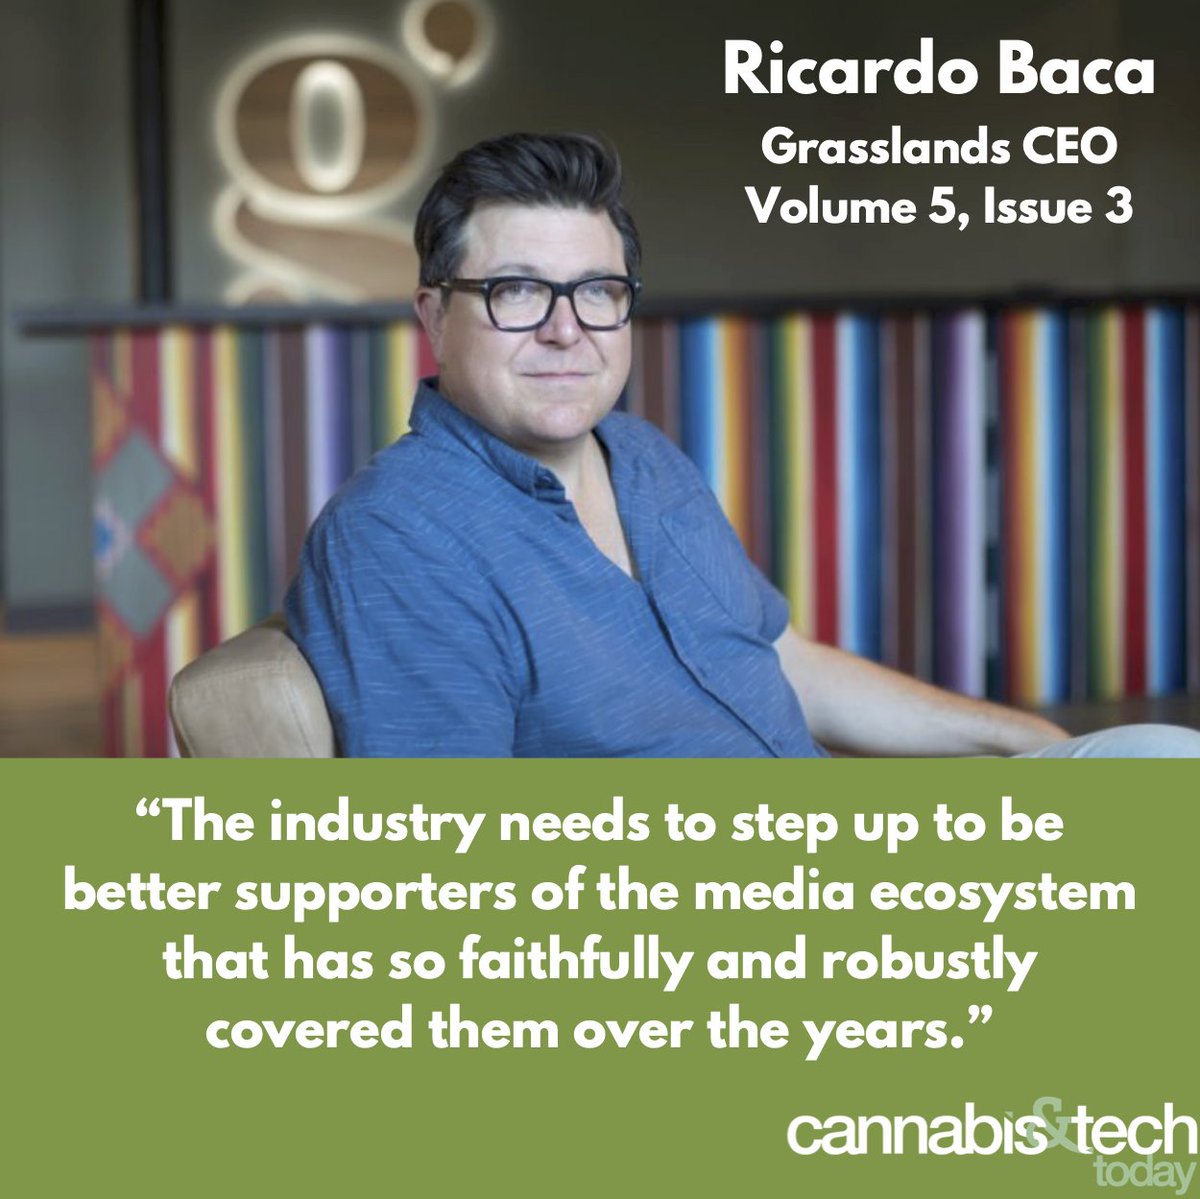 Grasslands CEO & industry thought leader Ricardo Baca gets candid about cannabis journalism, the lack of industry support in cannabis media, and his thoughts on rescheduling cannabis. Read his #coverstory on today's Cannabis & Tech Today homepage.
@grasslandsaf